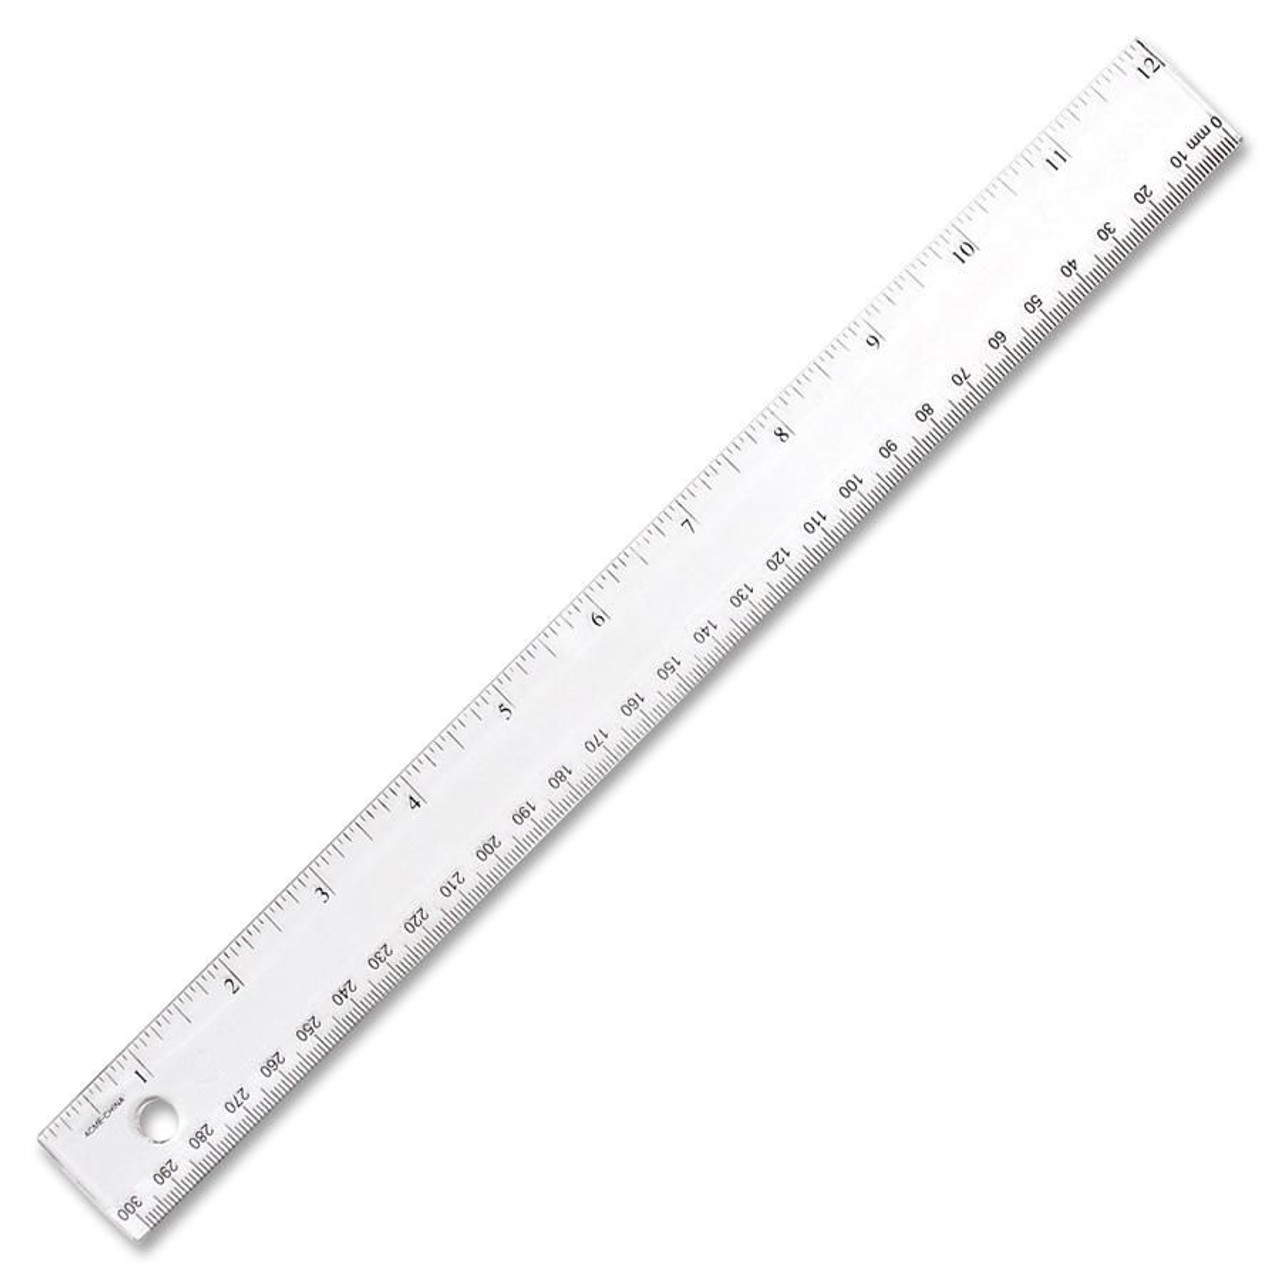 Plastic Ruler, Double Bevel, 12 Inches, Clear - CHL77136